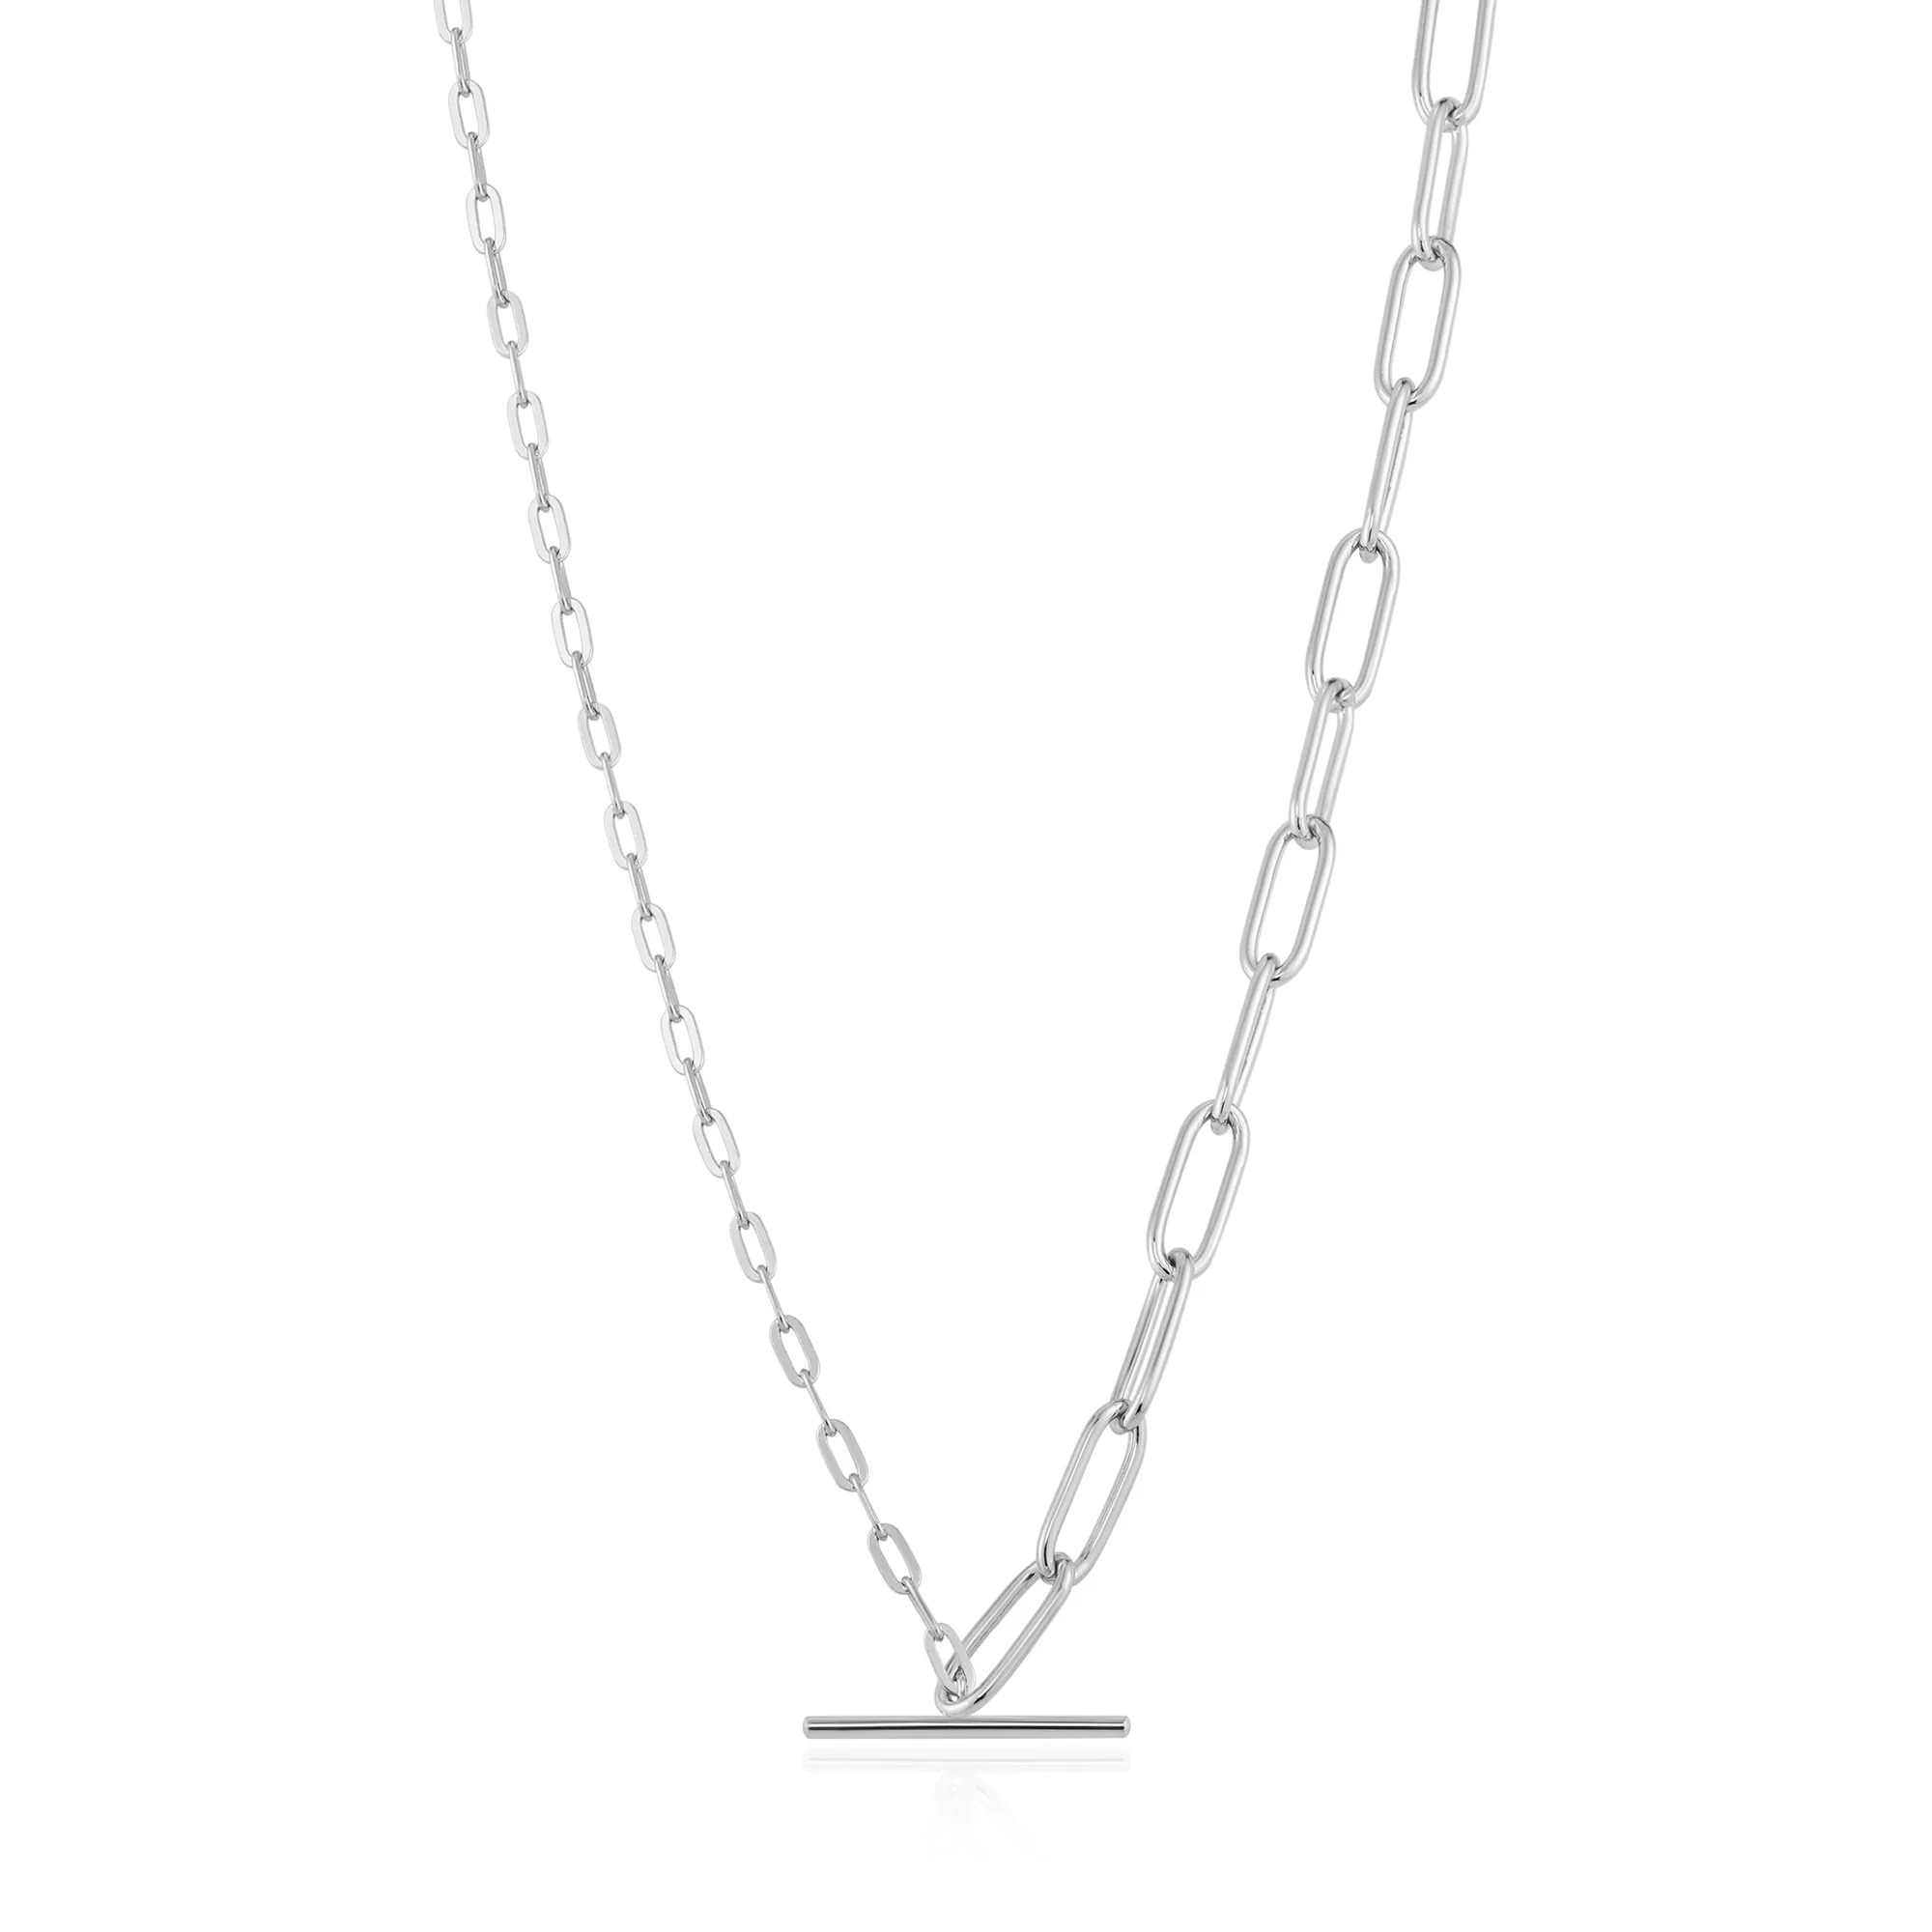 ANIA HAIE Silver Mixed Link T-bar Necklace